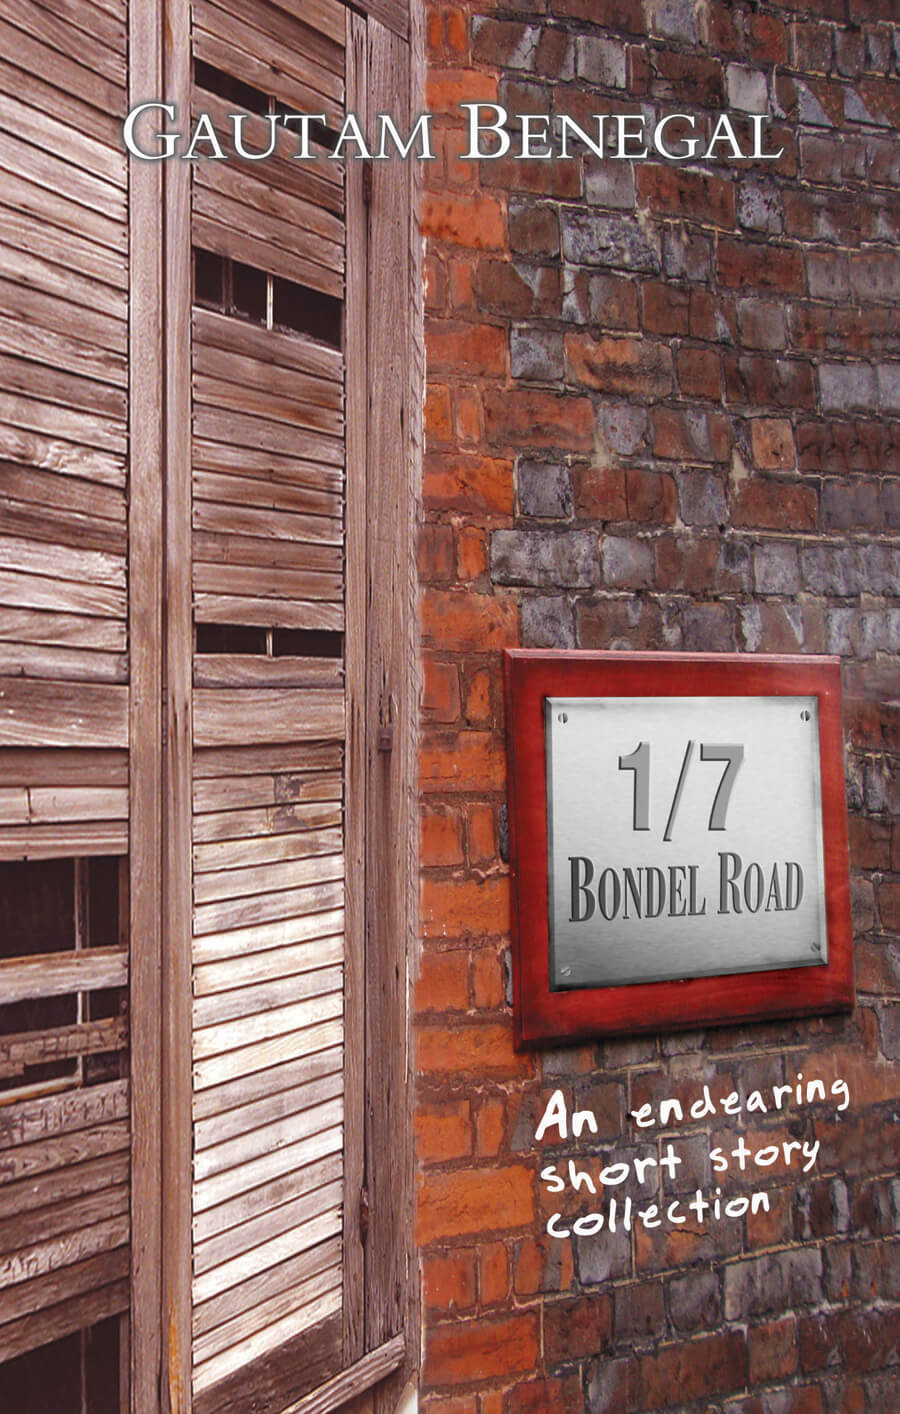 1/7 Bondel Road: An Endearing Short Story Collection